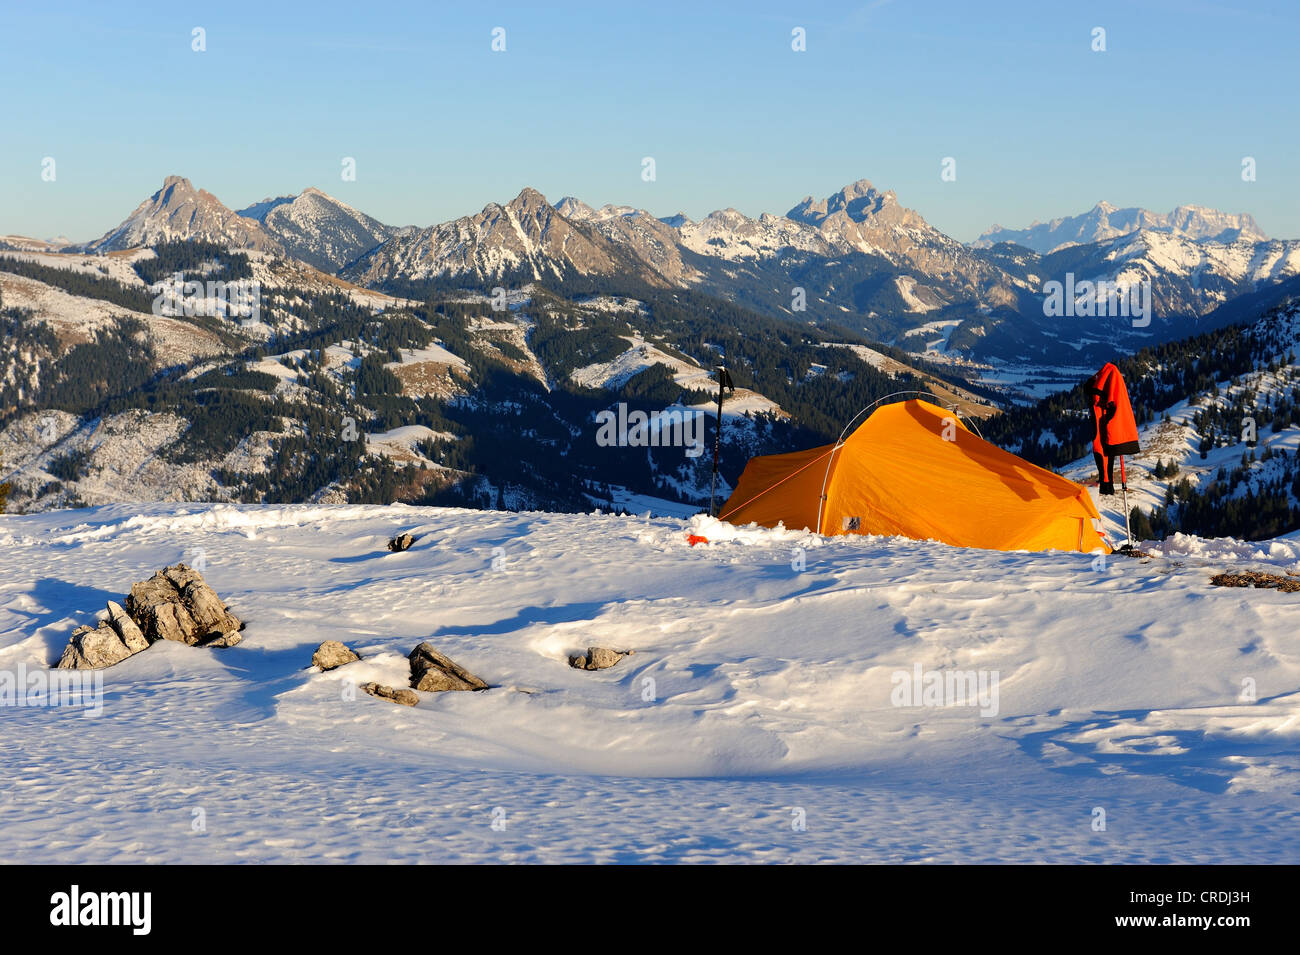 Mountain scenery and a tent in winter, Oberjoch mountain, Oberallgaeu, Bavaria, Germany, Europe Stock Photo